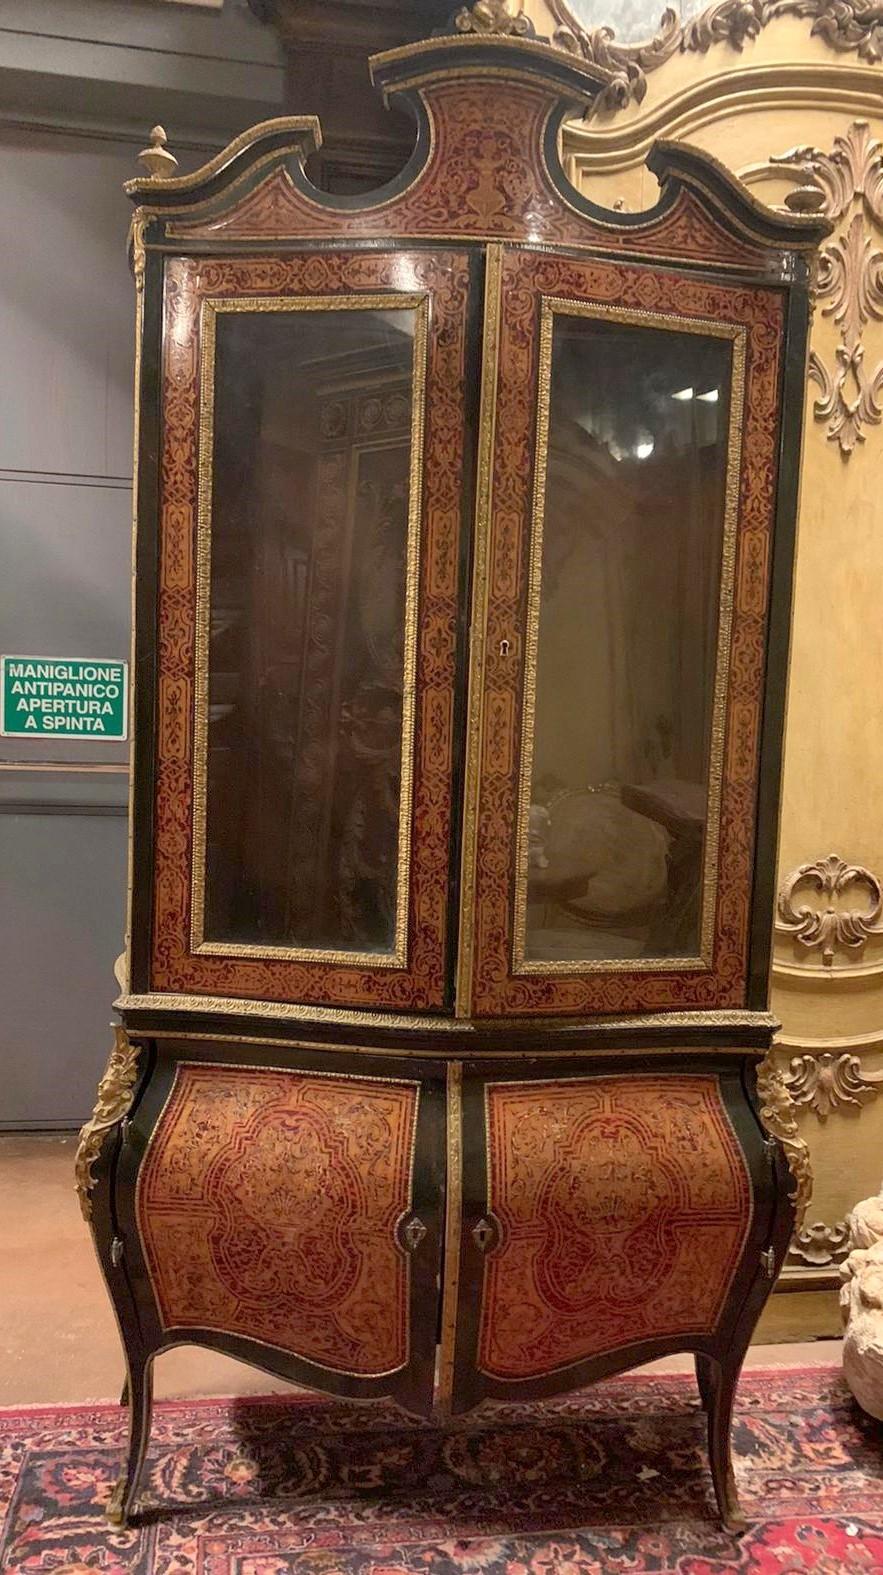 Vintage display cabinet, Boulle style, sculpted with rounded shape, complete with glass riser and base with closed doors, richly inlaid, predominance of black, red and gold colors, just as typical of the style, built in the early 1900s in